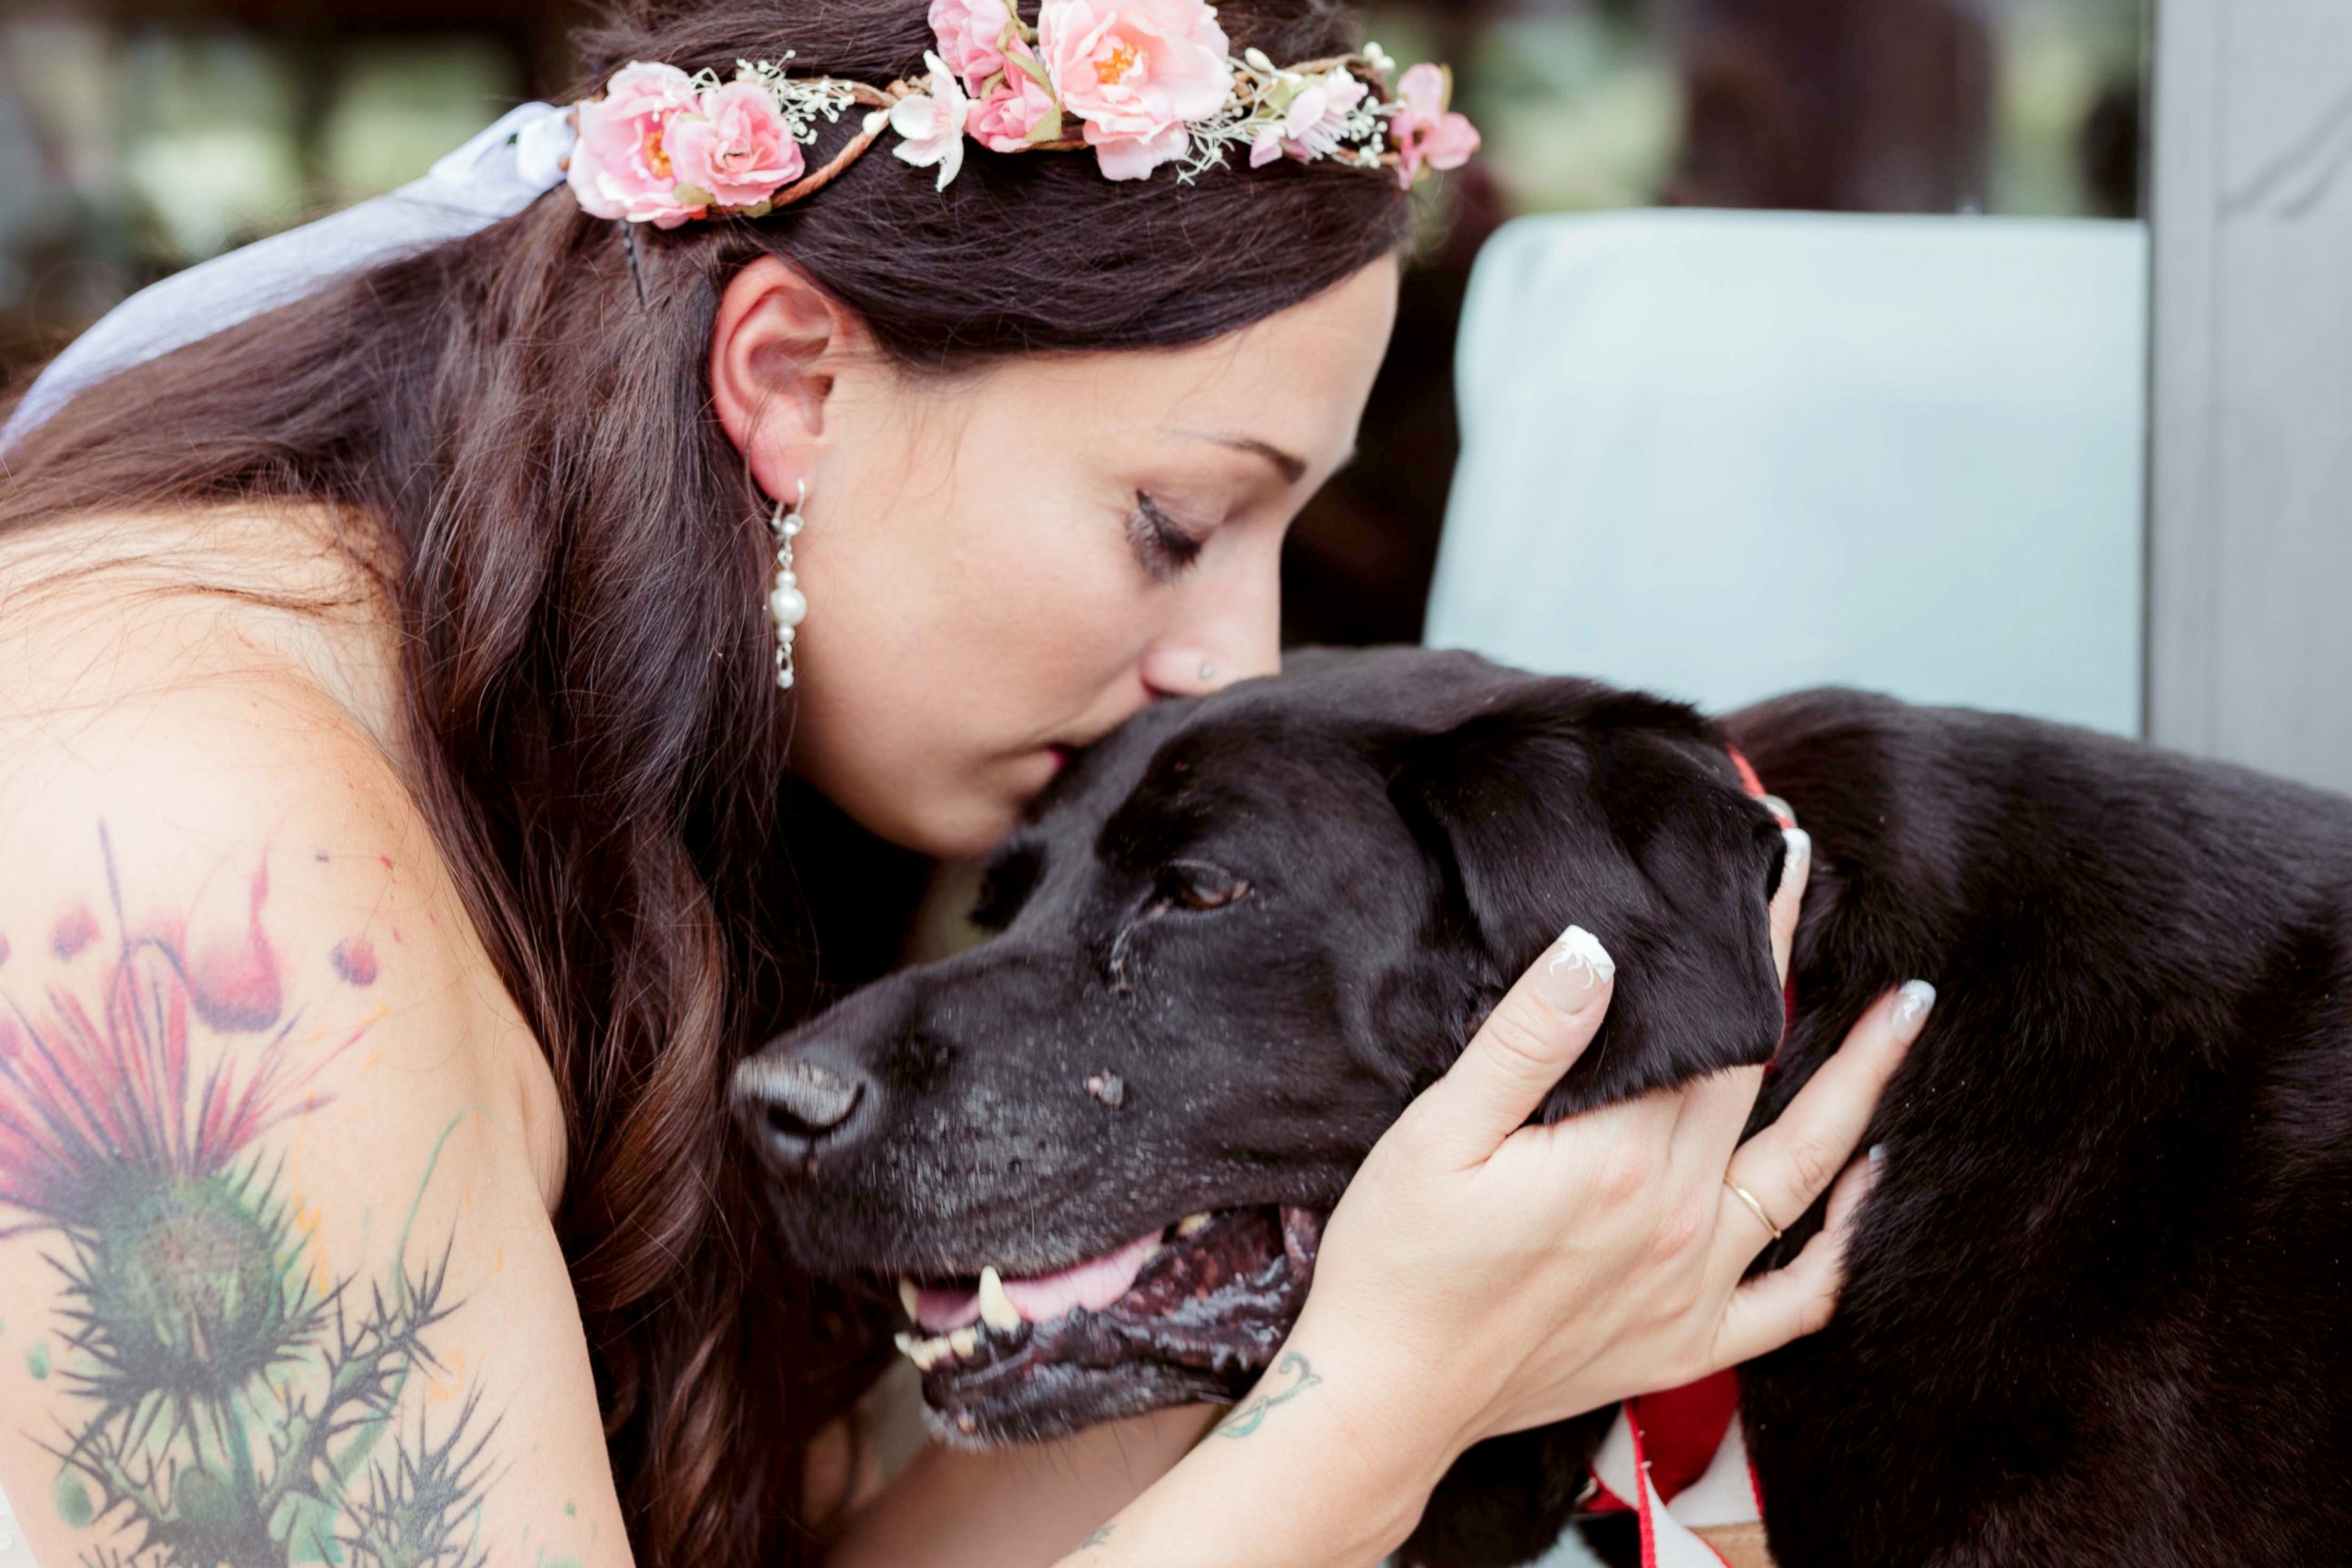 PHOTO: On Sept. 1, maid of honor Katie Lloyd carried Charlie Bear, 15, her sister's dying dog, down the aisle during her wedding in Buena Vista, Colorado. 